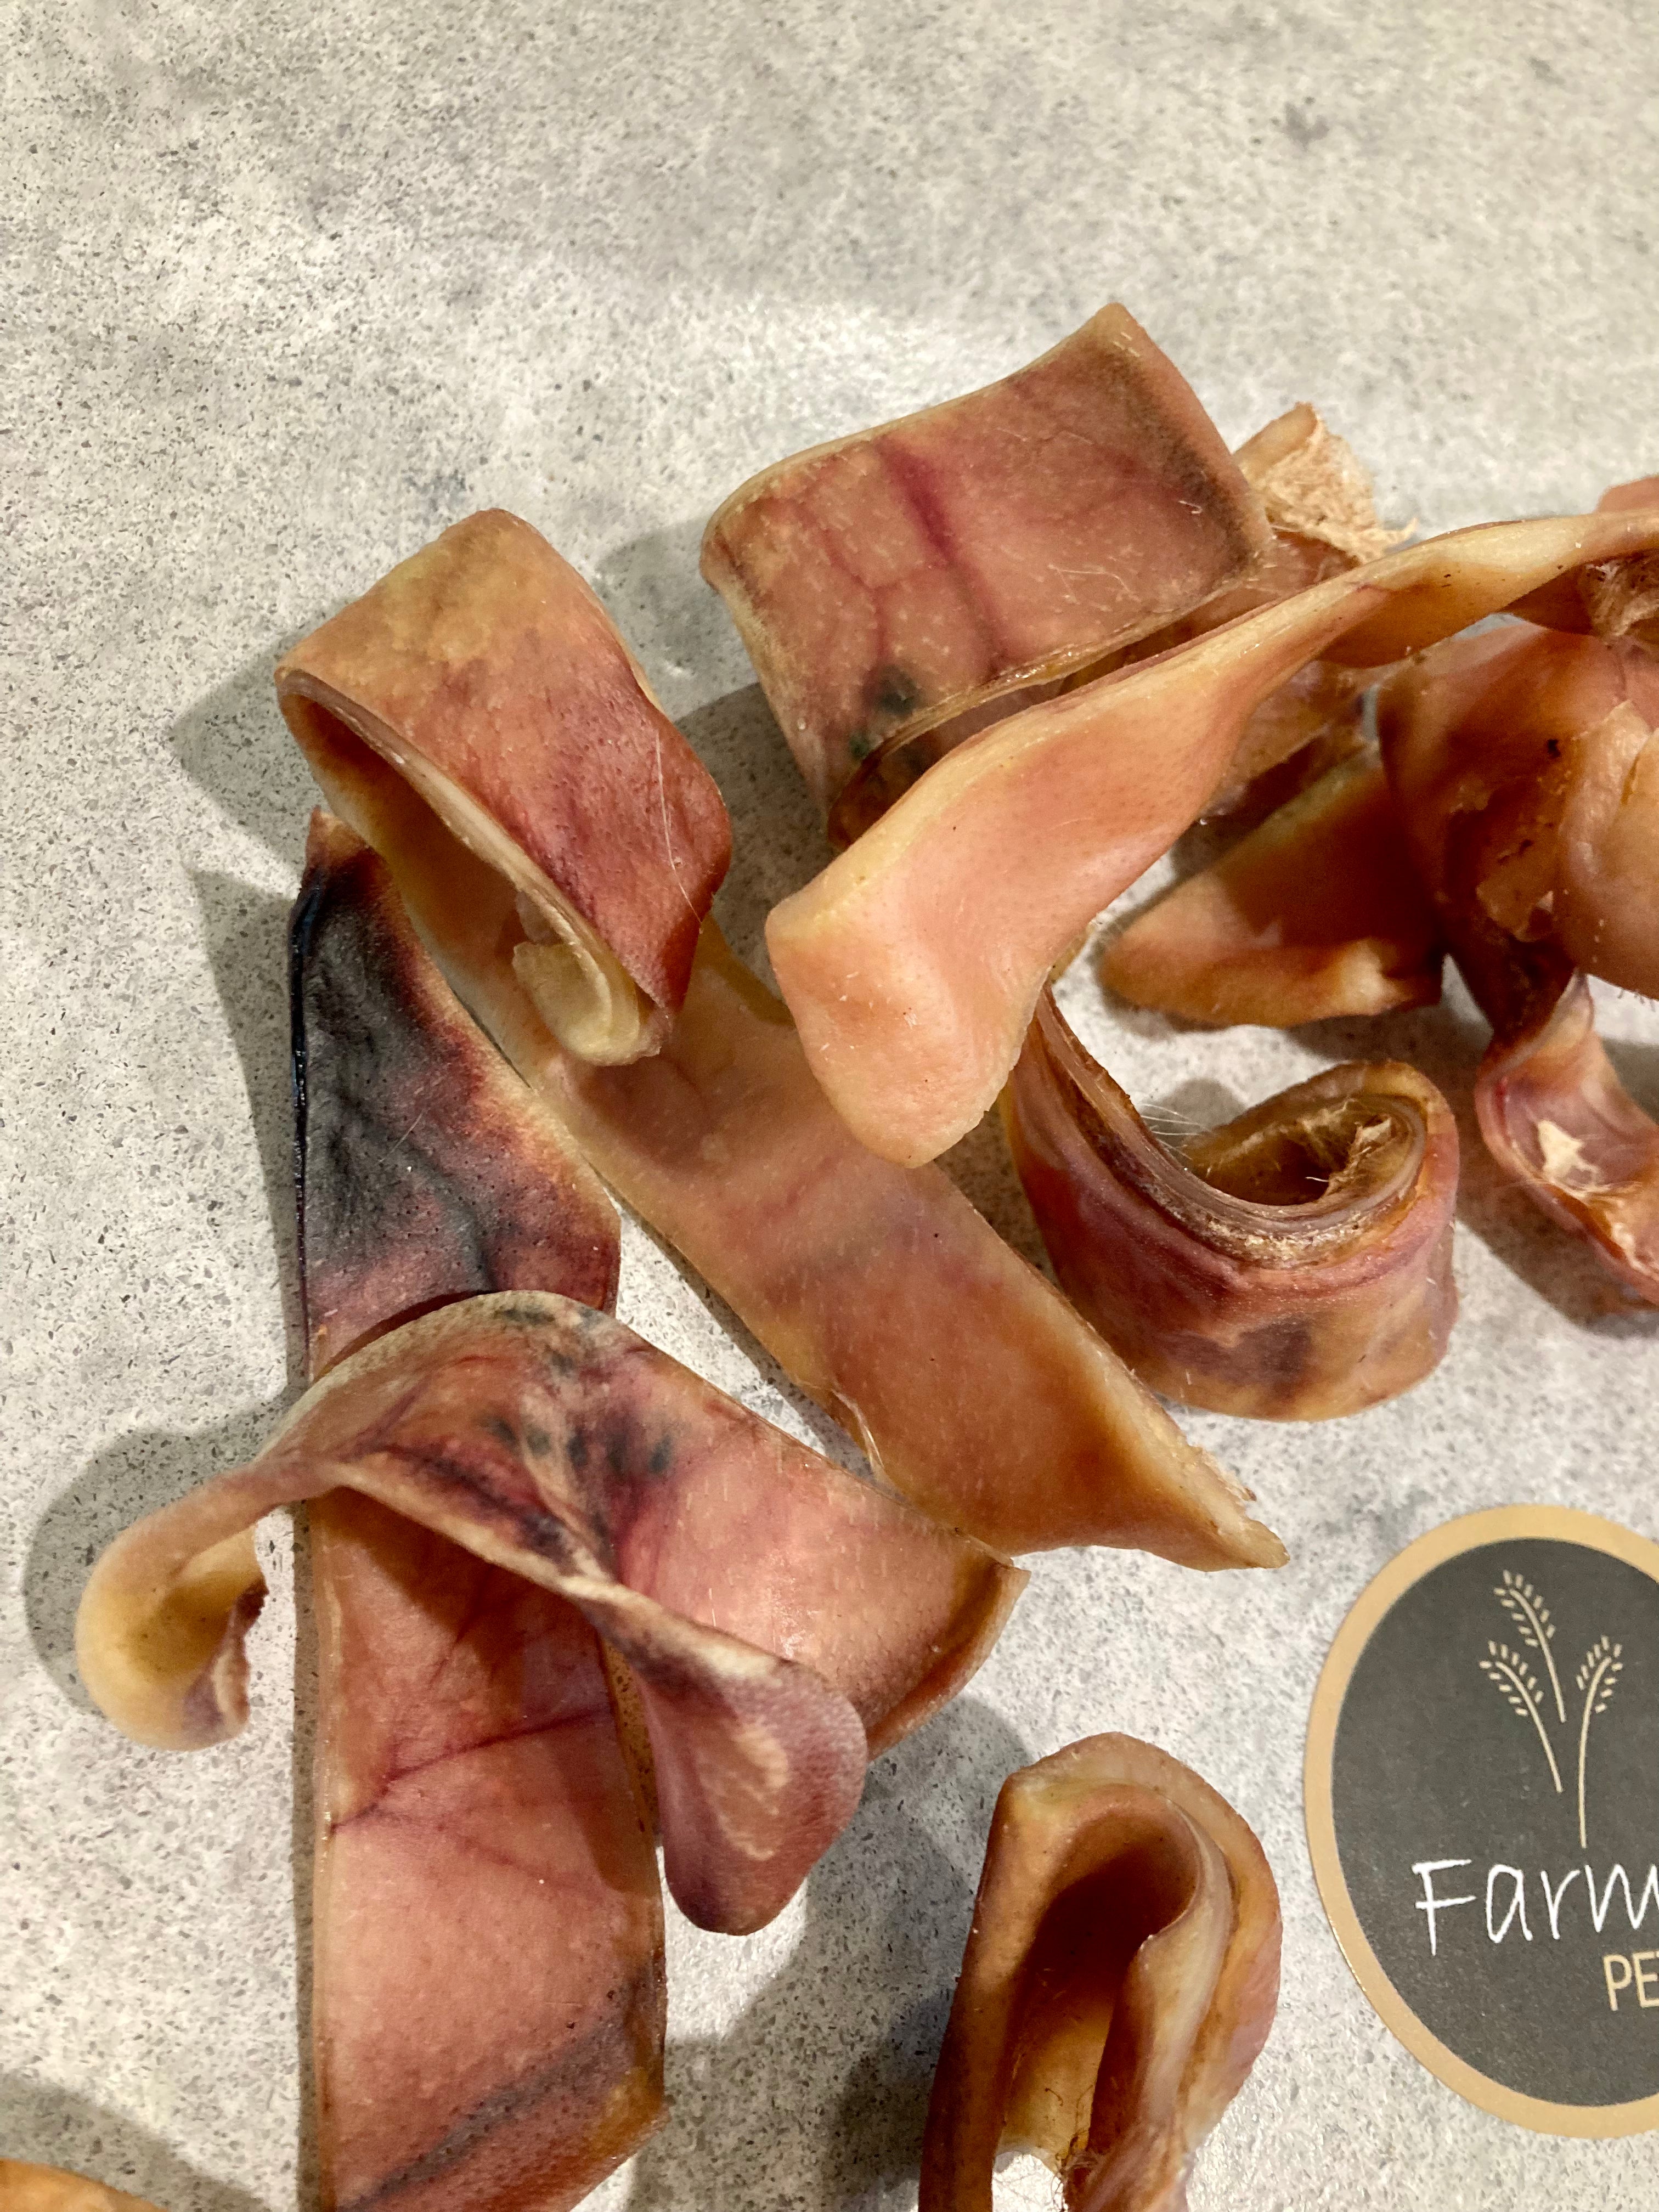 Pigs ear strip chewy treats for dogs by Farmer Pete's.